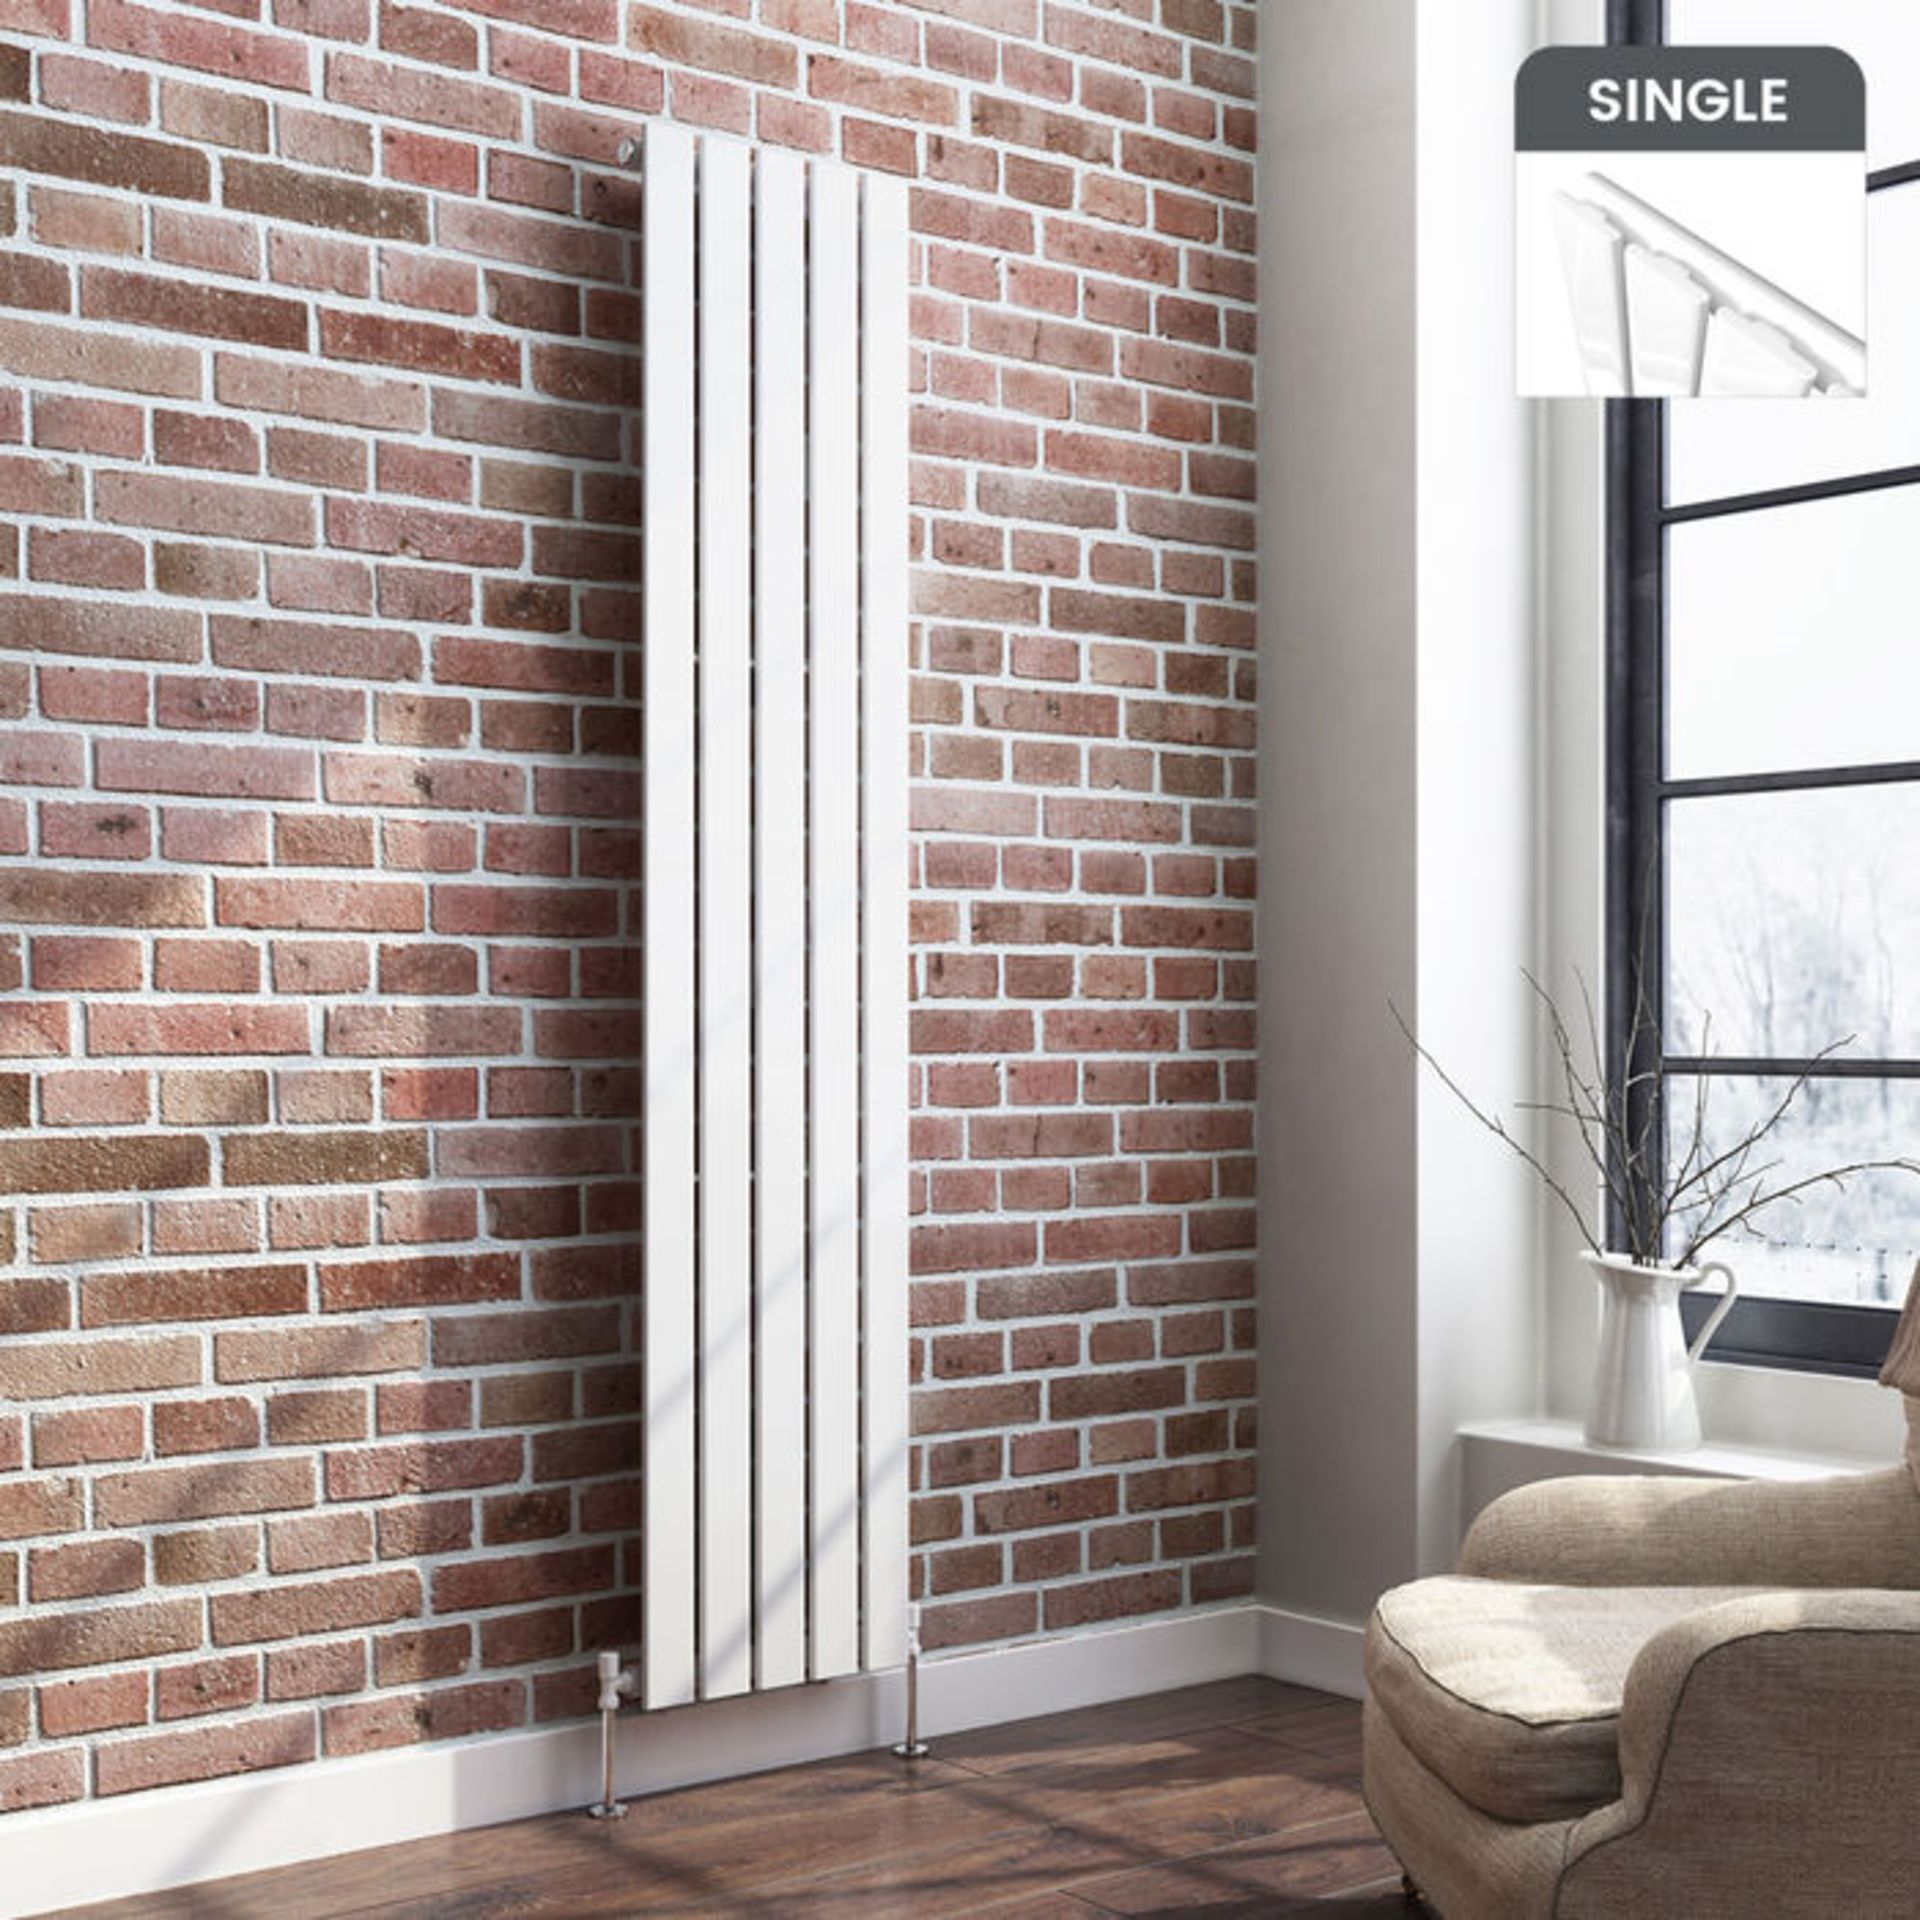 (HS114) 1800x376mm Gloss White Single Flat Panel Vertical Radiator. RRP £274.99. Made with low